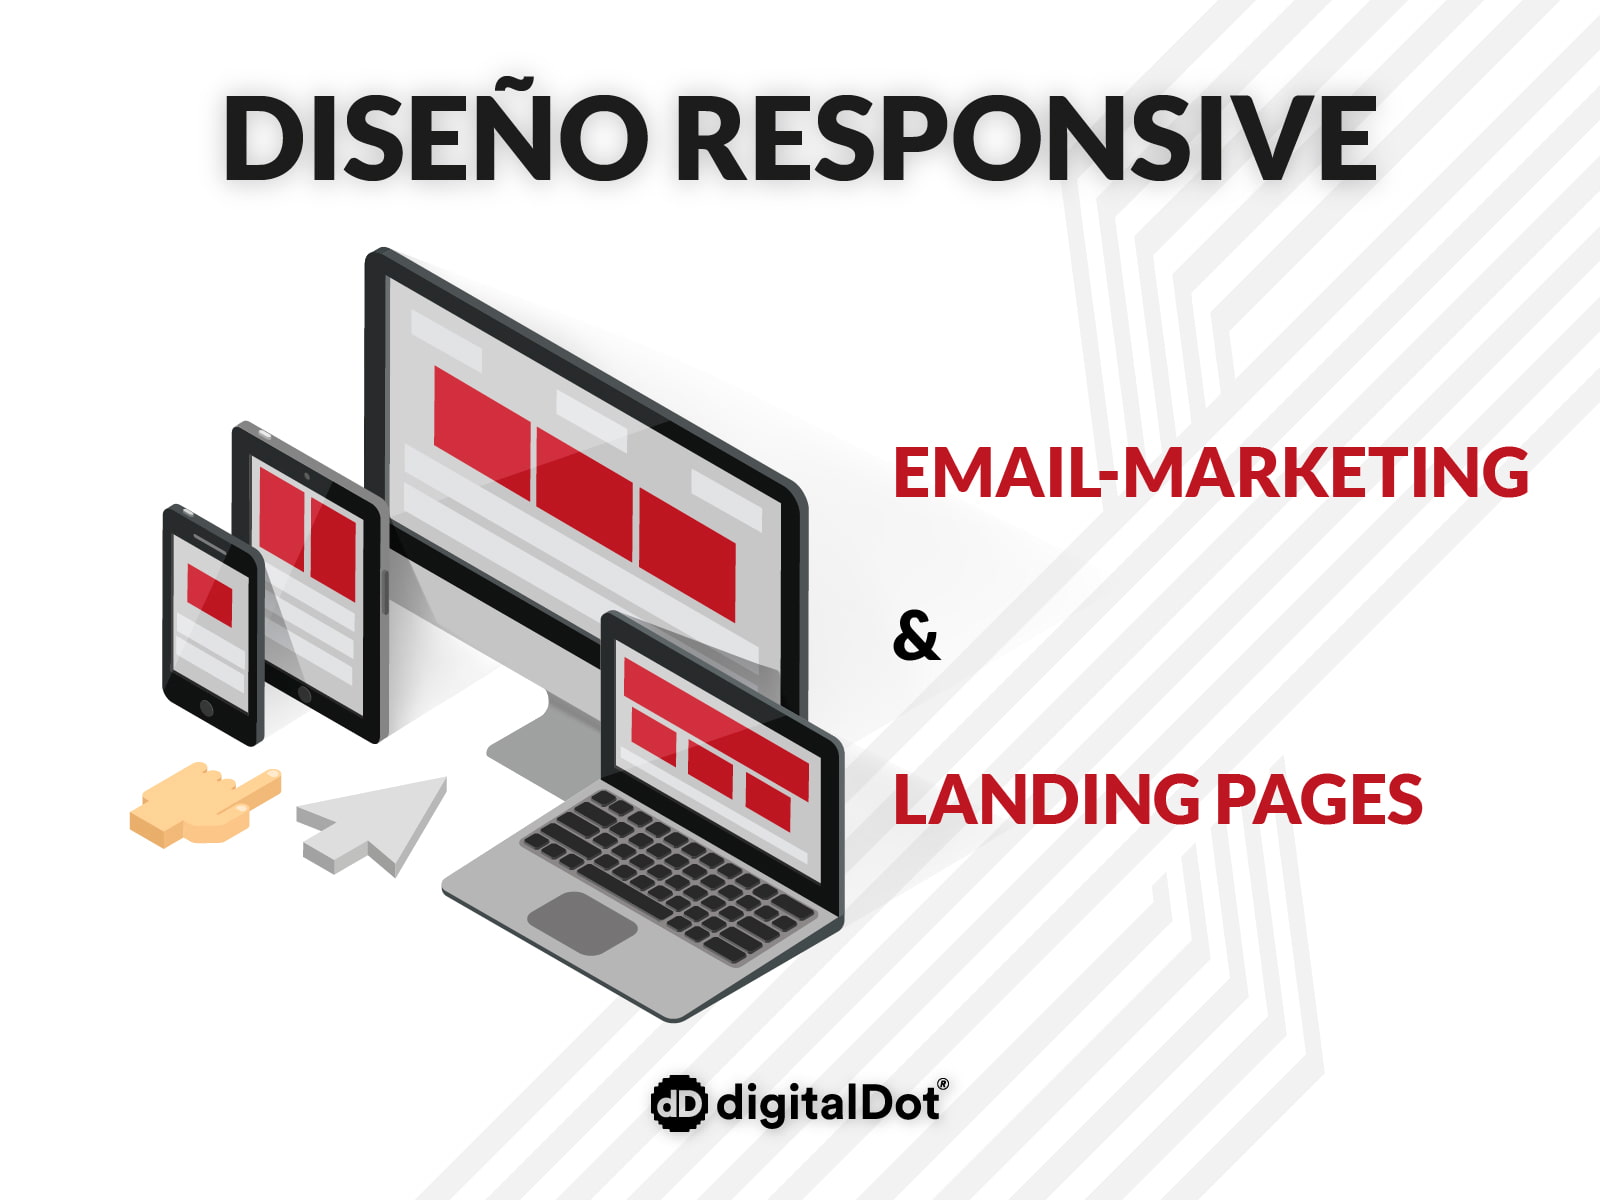 Diseño responsive para email marketing y landing pages